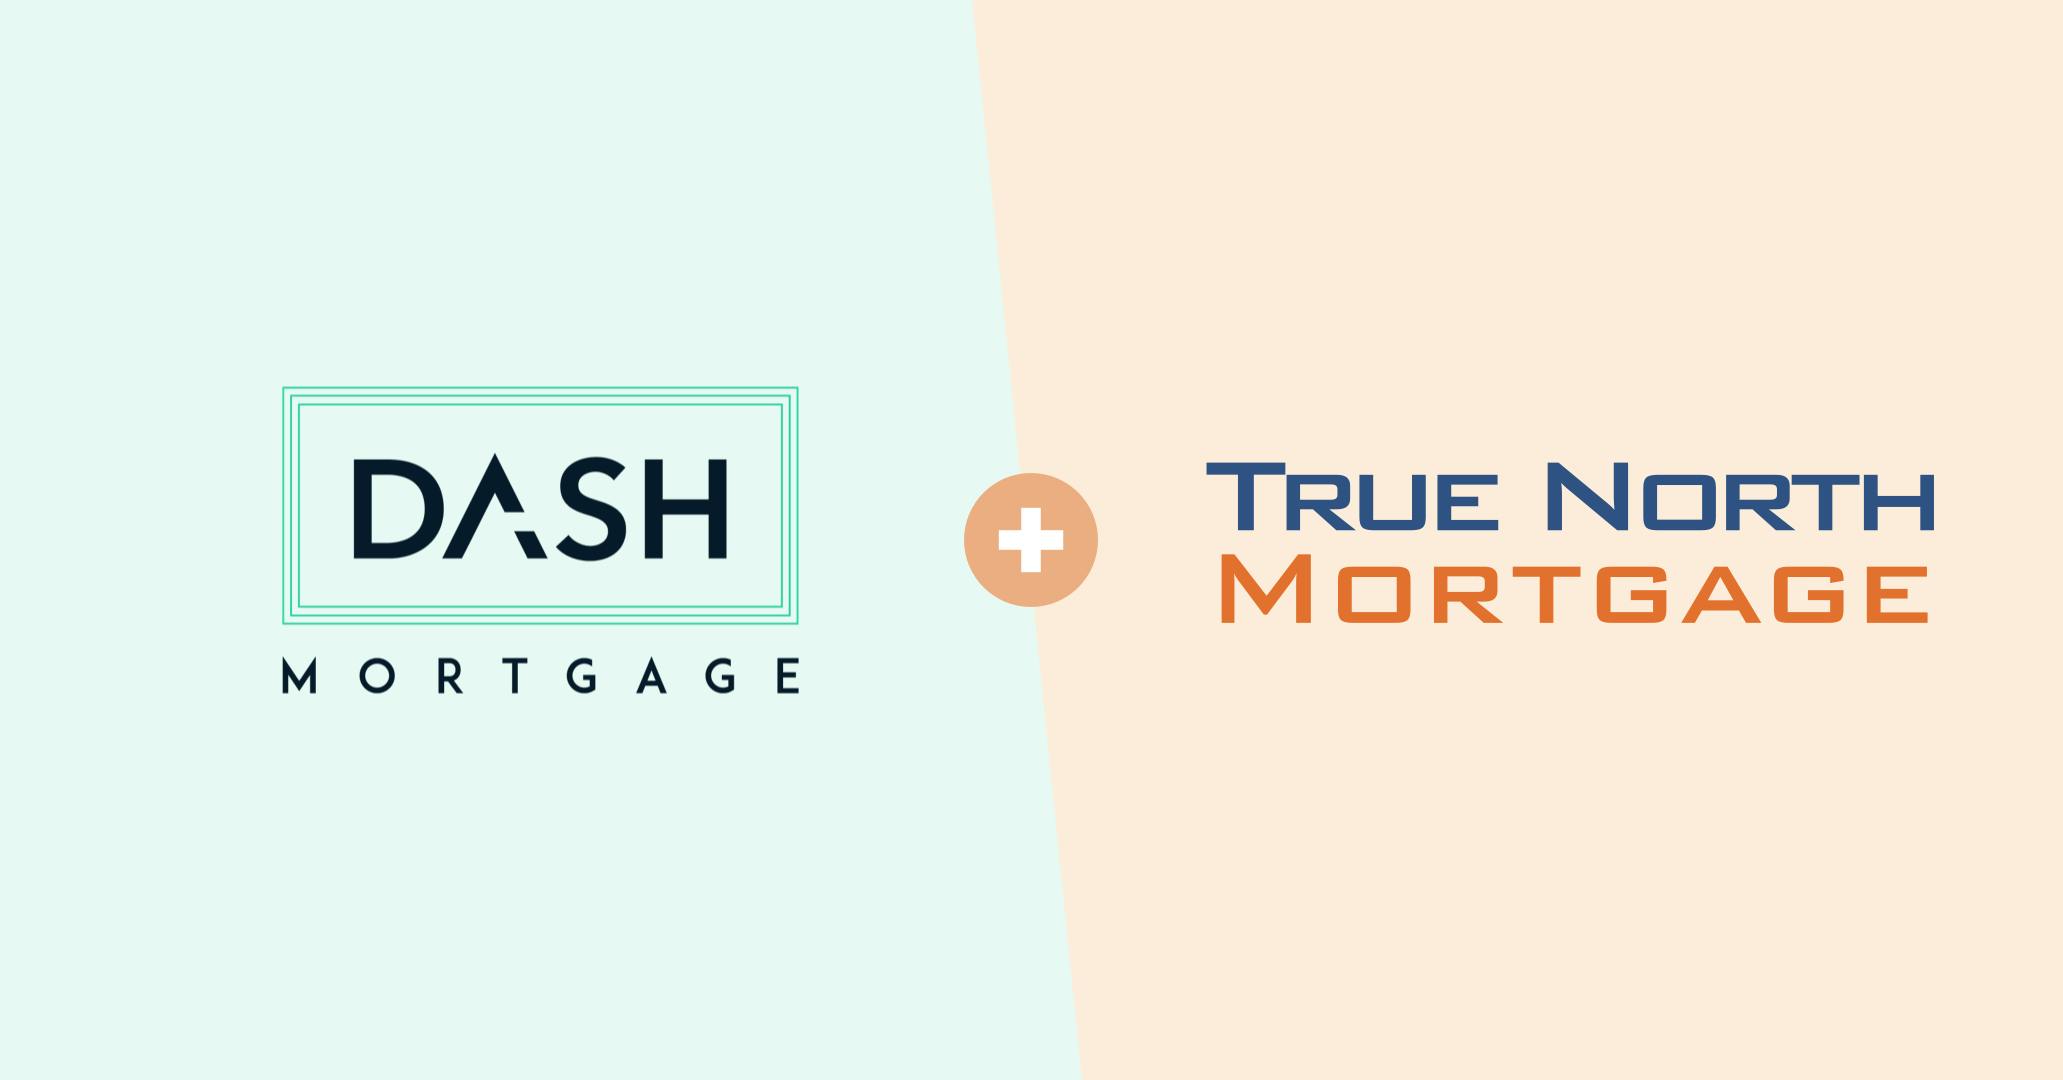 Dash Mortgage is joining True North Mortgage.